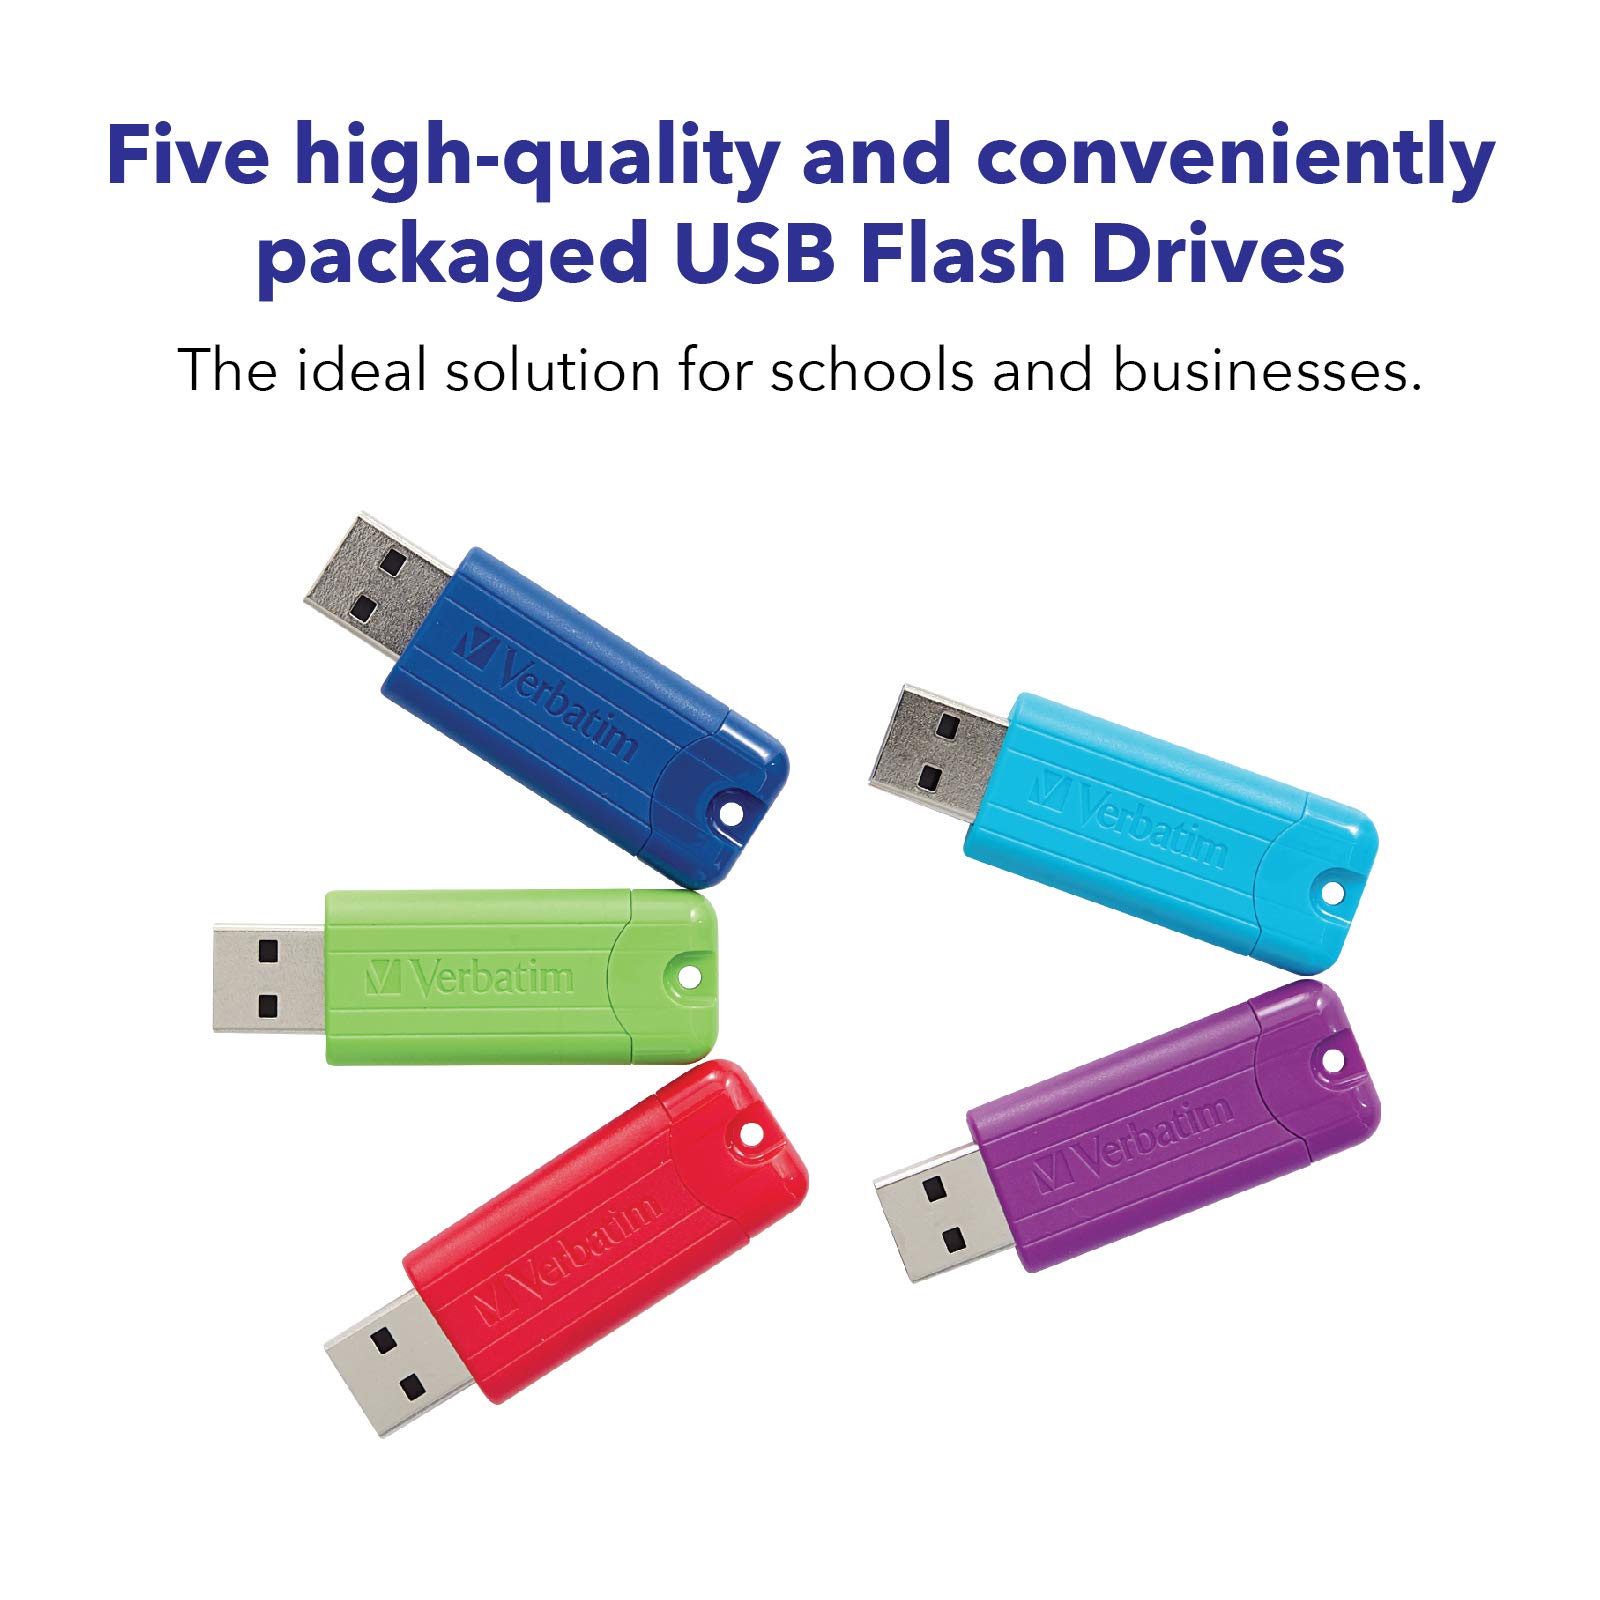 Verbatim 64GB Pinstripe USB 3.2 Gen 1 Flash Drive Retractable Thumb Drive with Microban Antimicrobial Product Protection- 5 Pack - Multicolor (Green, Blue, Red, Purple, Cyan)